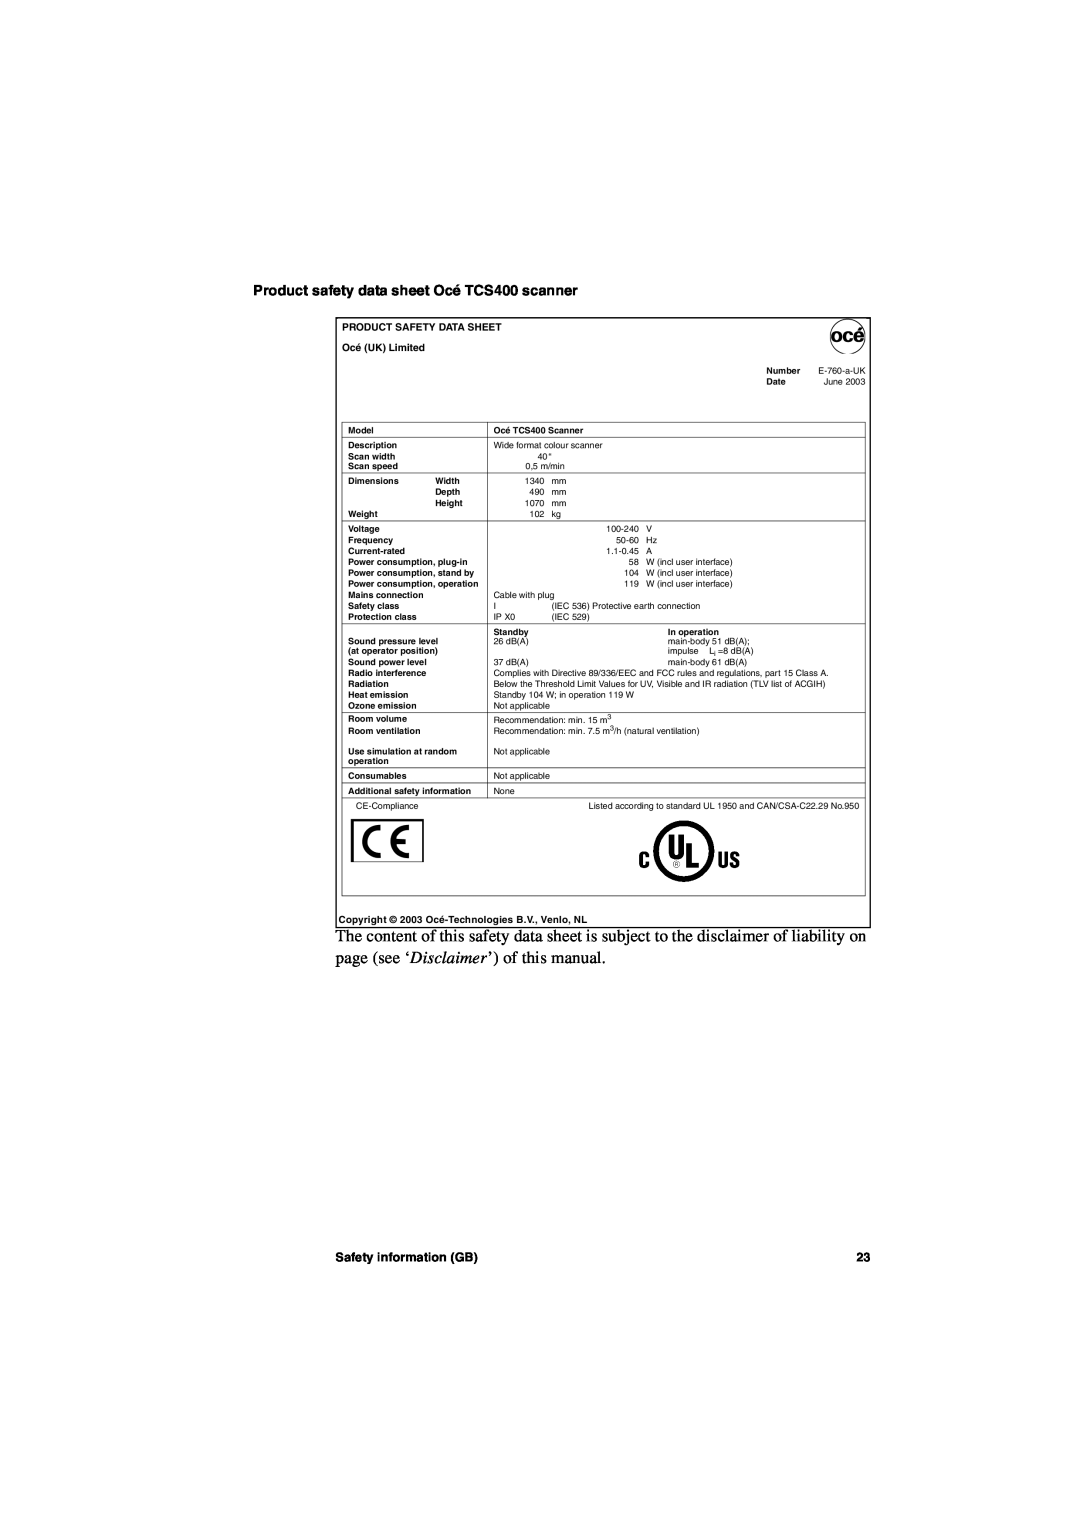 Oce North America manual Product safety data sheet Océ TCS400 scanner, Safety information GB 